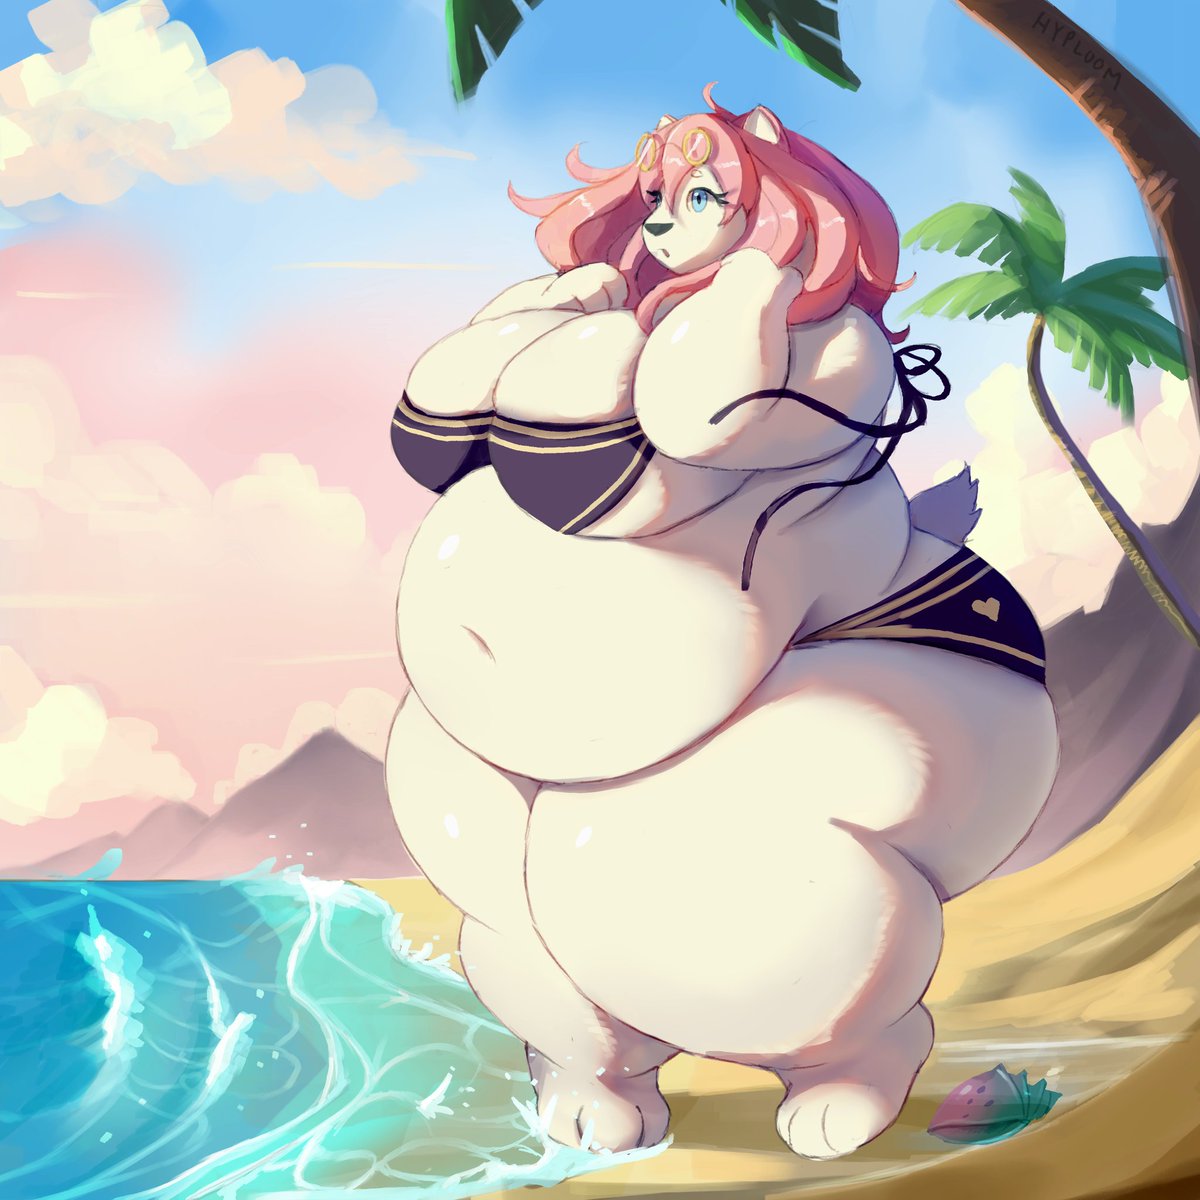 Big polar takes in the horizon. Momo seems to enjoy calm sunsets at the ocean! Raffle Prize for @GalaxySpartan , tysm!